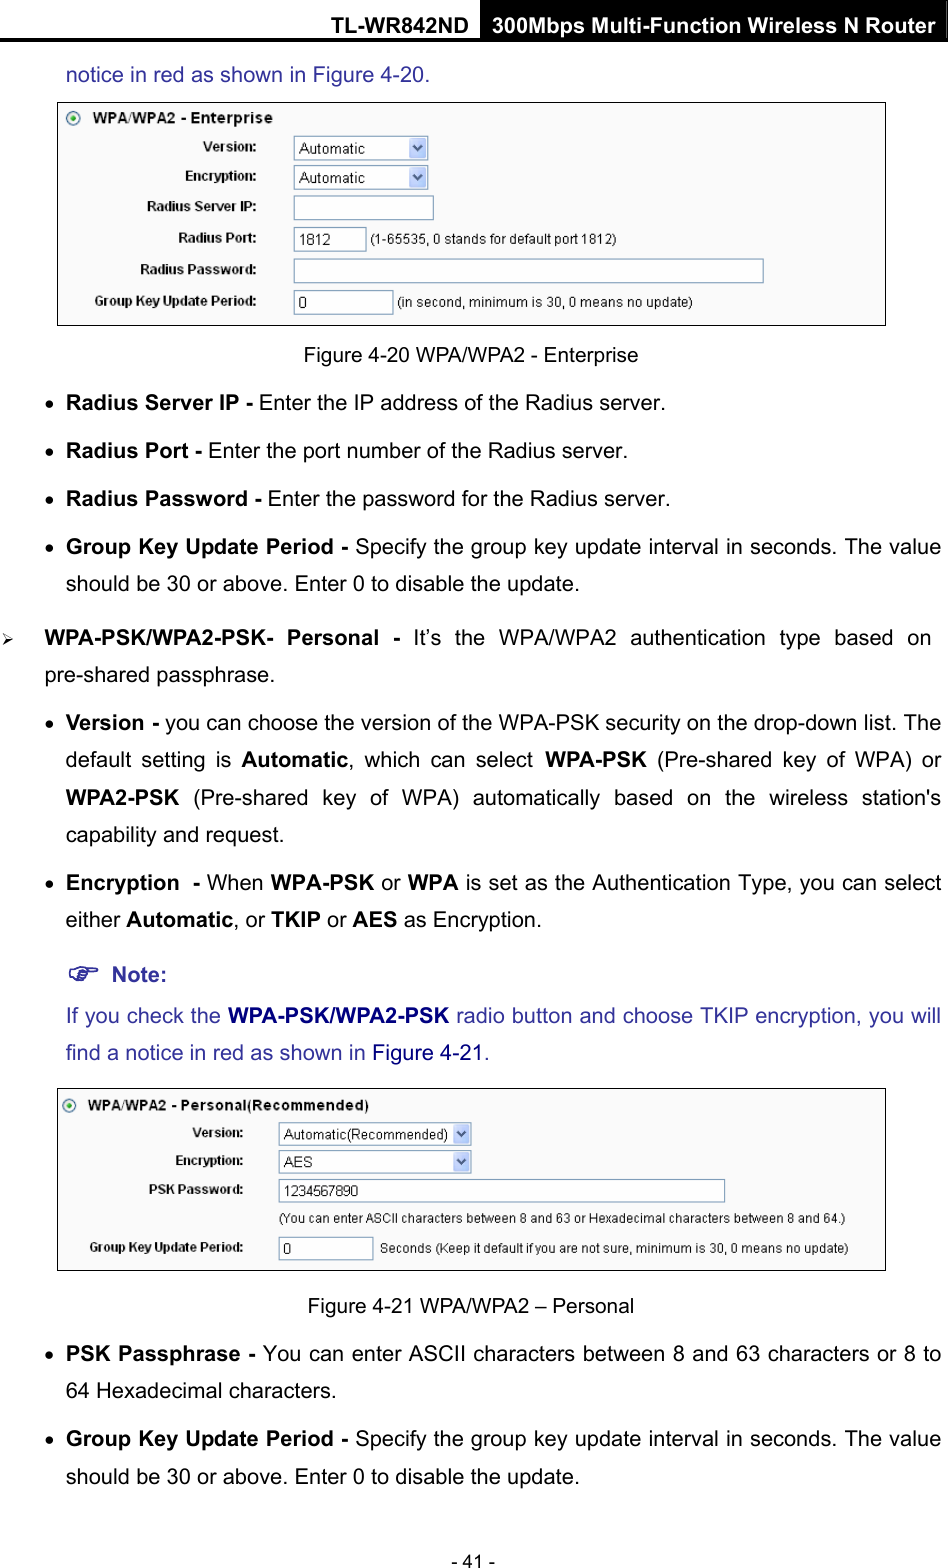 TL-WR842ND 300Mbps Multi-Function Wireless N Router - 41 - notice in red as shown in Figure 4-20.  Figure 4-20 WPA/WPA2 - Enterprise • Radius Server IP - Enter the IP address of the Radius server. • Radius Port - Enter the port number of the Radius server. • Radius Password - Enter the password for the Radius server. • Group Key Update Period - Specify the group key update interval in seconds. The value should be 30 or above. Enter 0 to disable the update. ¾ WPA-PSK/WPA2-PSK- Personal - It’s the WPA/WPA2 authentication type based on pre-shared passphrase.   • Version - you can choose the version of the WPA-PSK security on the drop-down list. The default setting is Automatic, which can select WPA-PSK  (Pre-shared key of WPA) or WPA2-PSK  (Pre-shared key of WPA) automatically based on the wireless station&apos;s capability and request. • Encryption - When WPA-PSK or WPA is set as the Authentication Type, you can select either Automatic, or TKIP or AES as Encryption. ) Note:  If you check the WPA-PSK/WPA2-PSK radio button and choose TKIP encryption, you will find a notice in red as shown in Figure 4-21.  Figure 4-21 WPA/WPA2 – Personal • PSK Passphrase - You can enter ASCII characters between 8 and 63 characters or 8 to 64 Hexadecimal characters. • Group Key Update Period - Specify the group key update interval in seconds. The value should be 30 or above. Enter 0 to disable the update. 